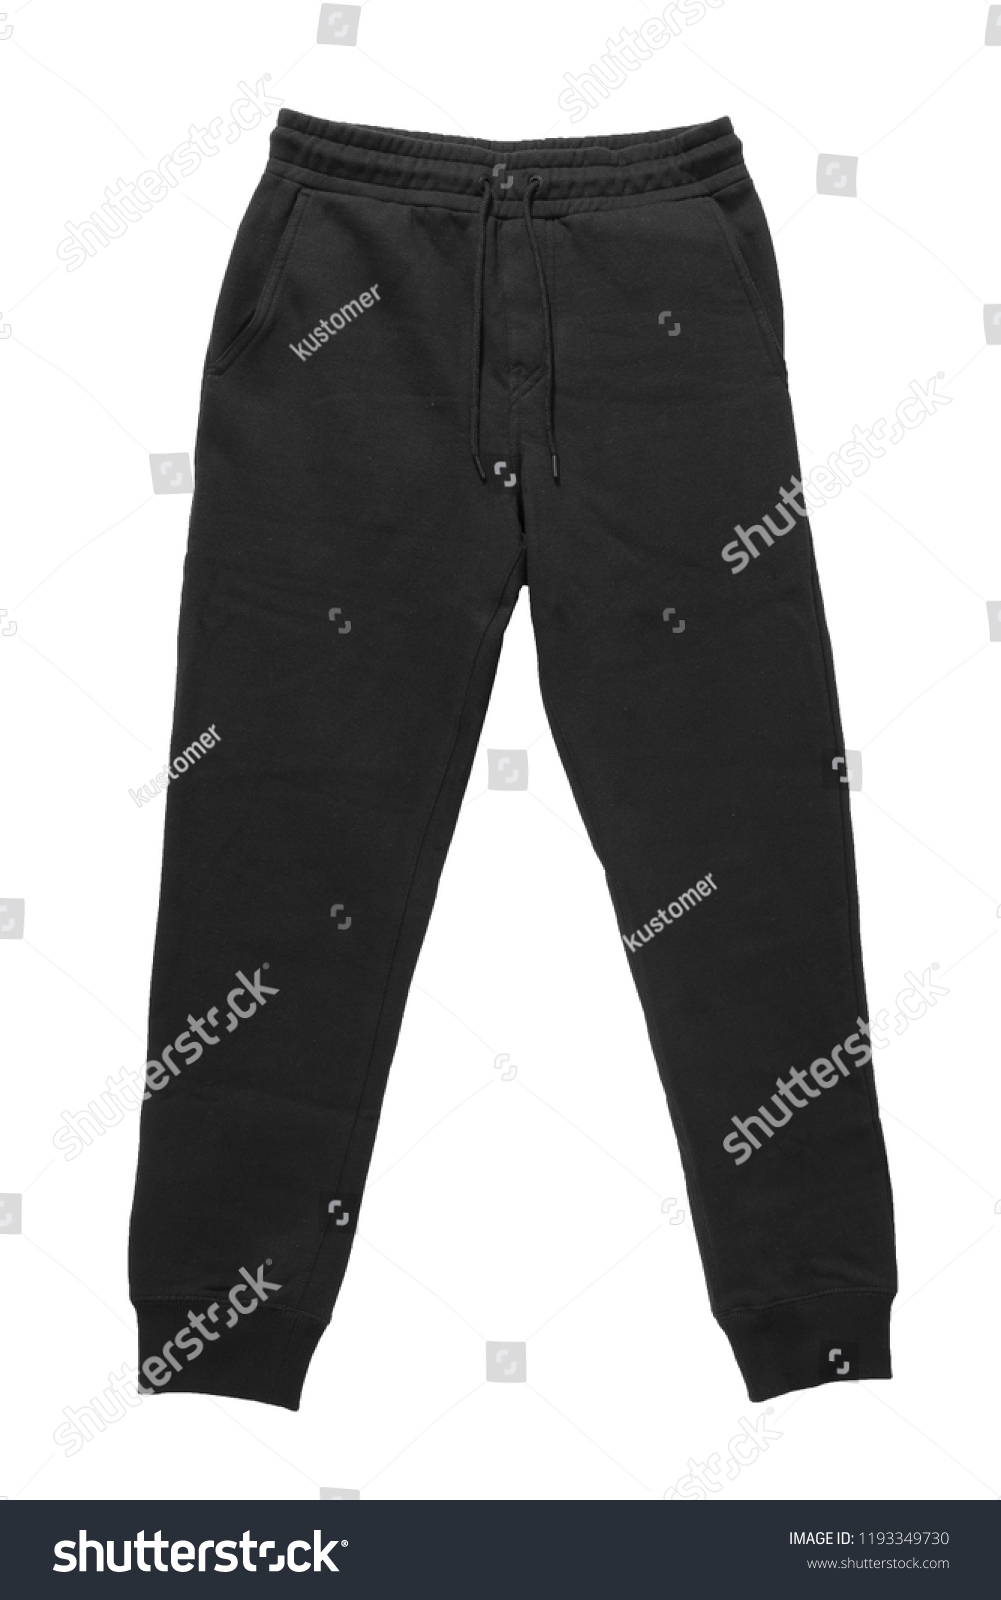 Blank training jogger pants color black front view on white background
 #1193349730